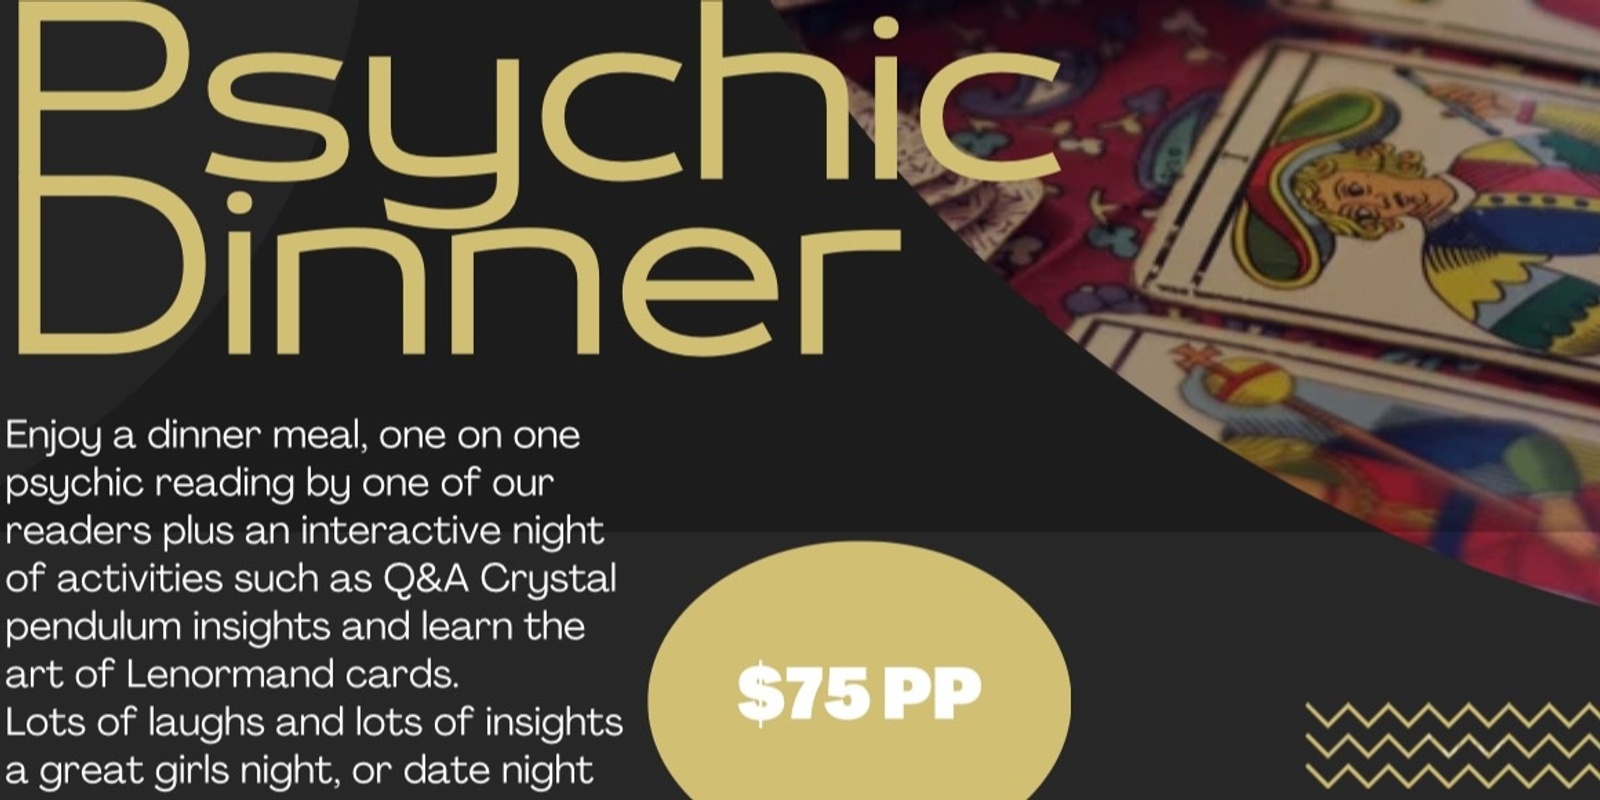 Banner image for Psychic Dinner @Seaford hotel 17th June